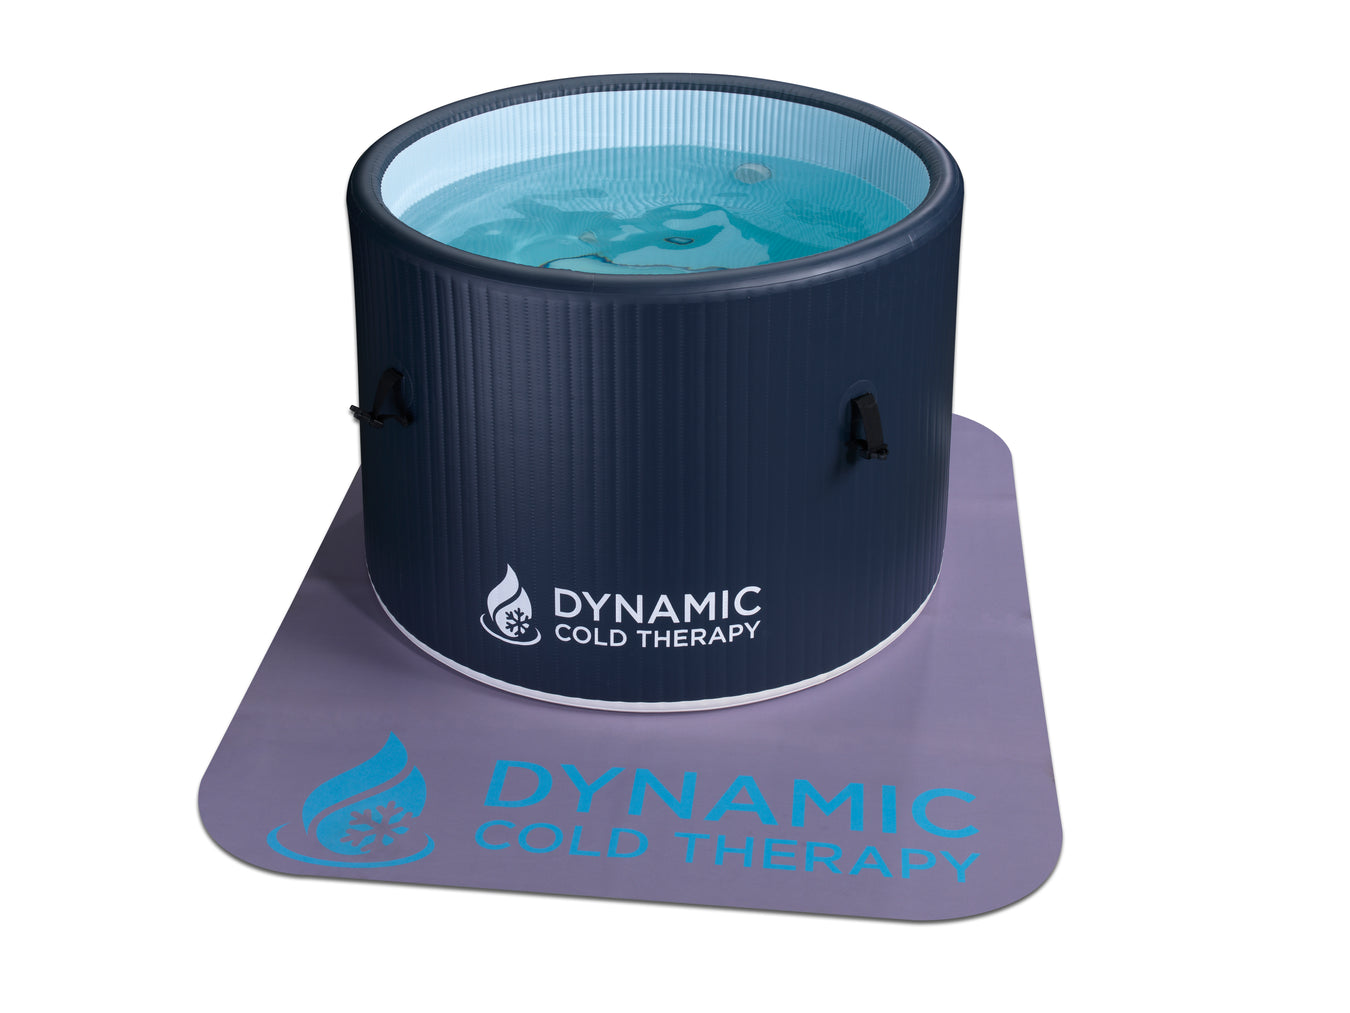 Dynamic Cold Therapy